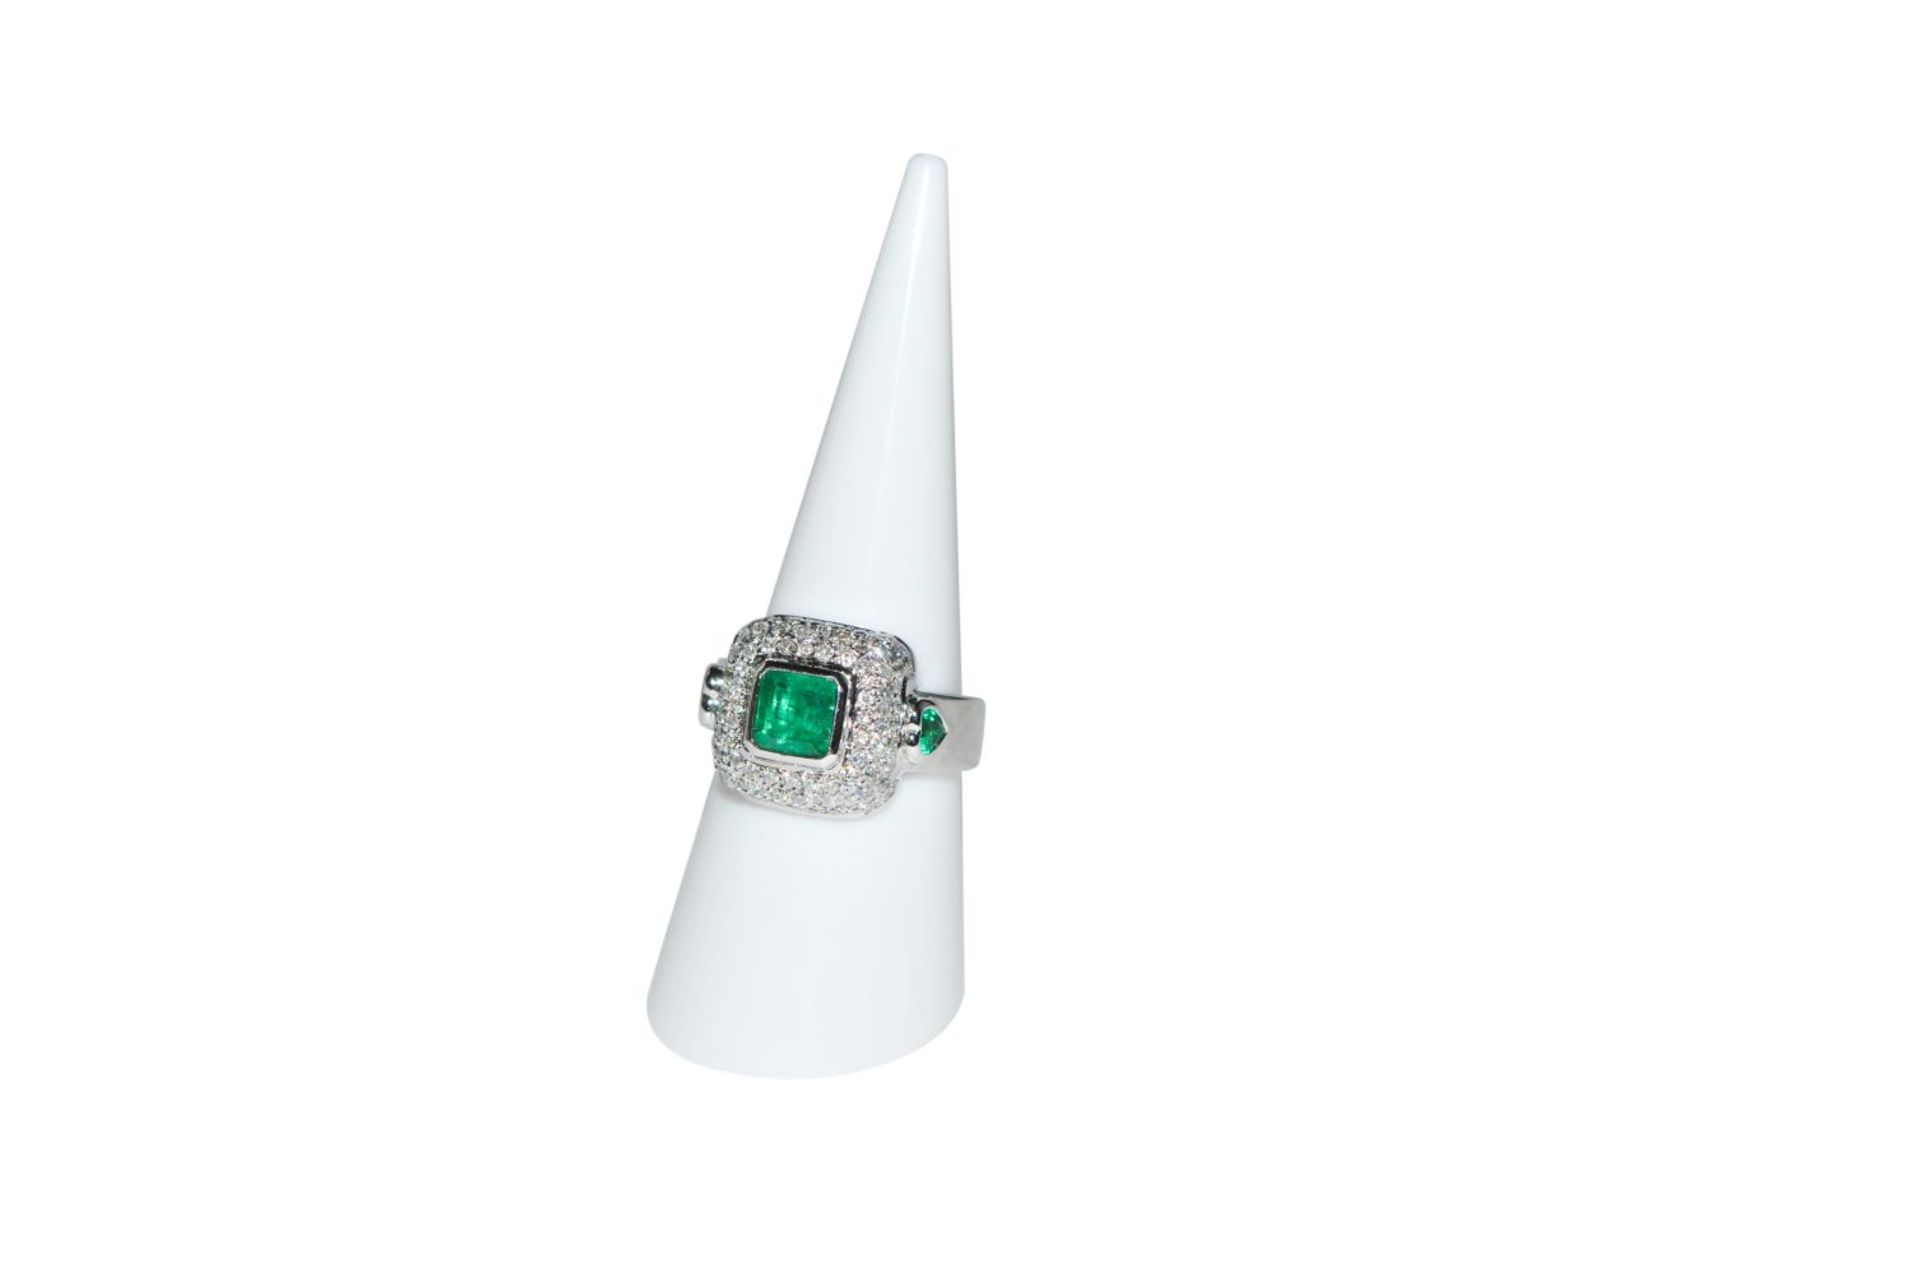 Brilliant ring with emerald18kt white gold ring with brilliants, total carat weight approx. 0.87ct